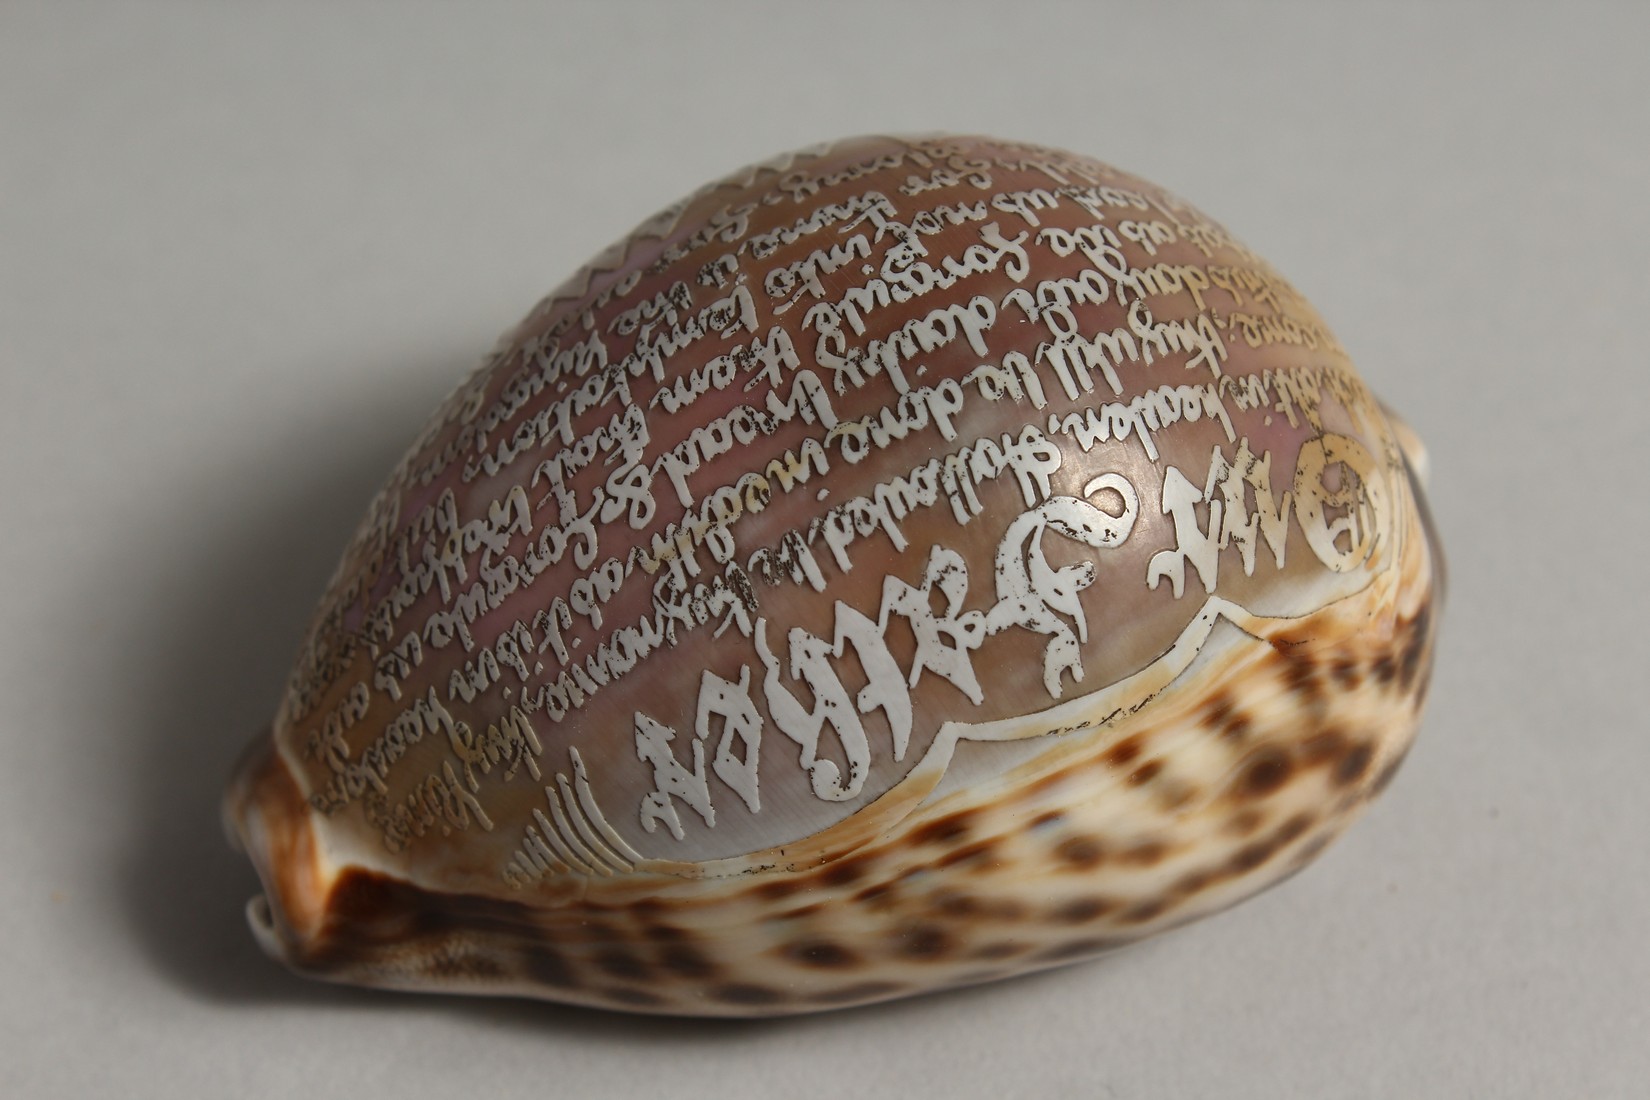 A SHELL CARVED WITH THE LORD'S PRAYER. 3ins. - Image 5 of 7